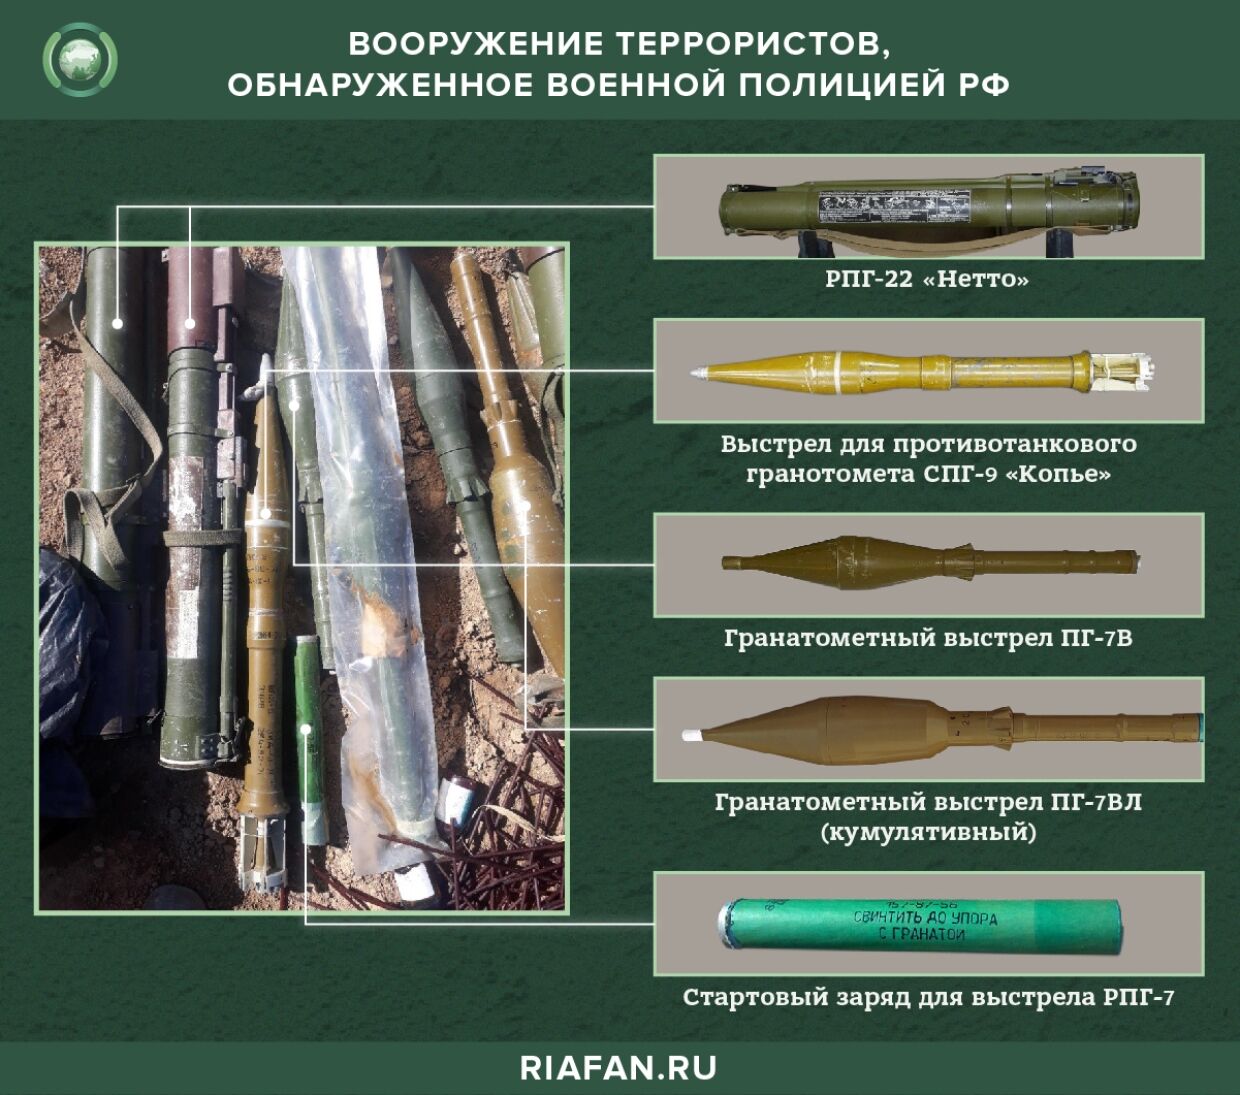 Russian Military Police found a large cache of weapons terrorists near Damascus